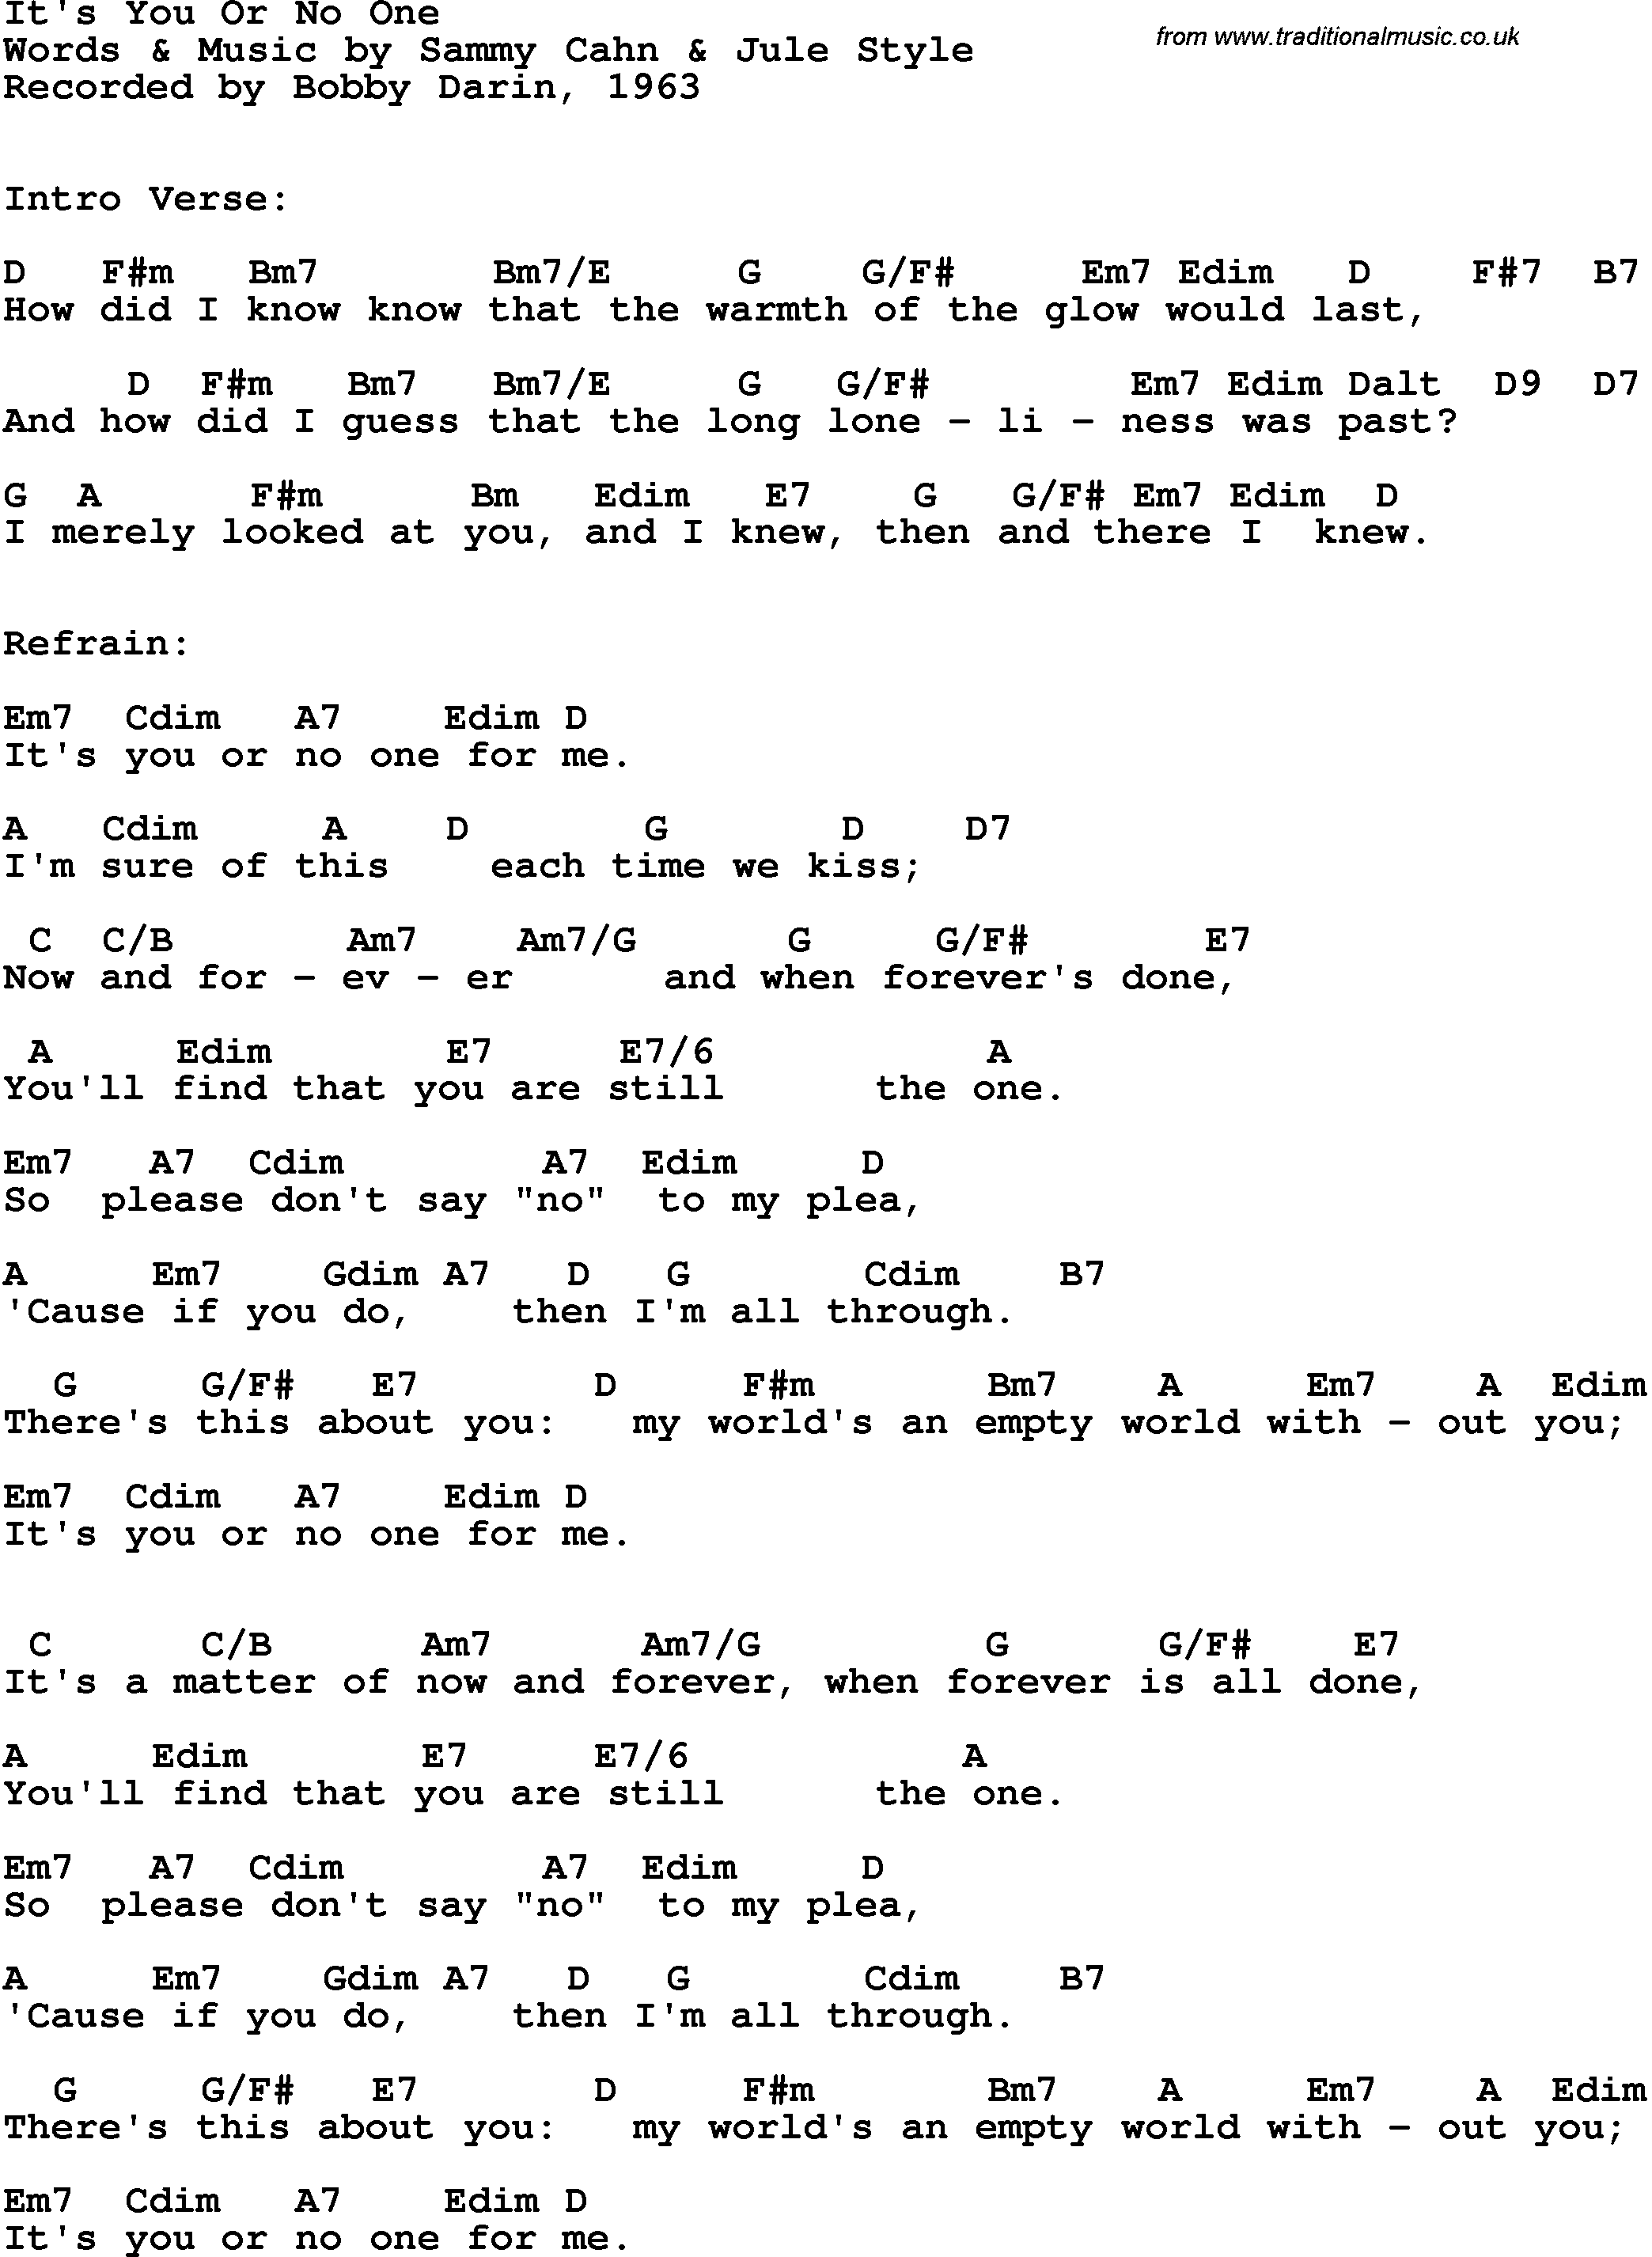 Song Lyrics with guitar chords for It's You Or No One - Bobby Darin, 1963